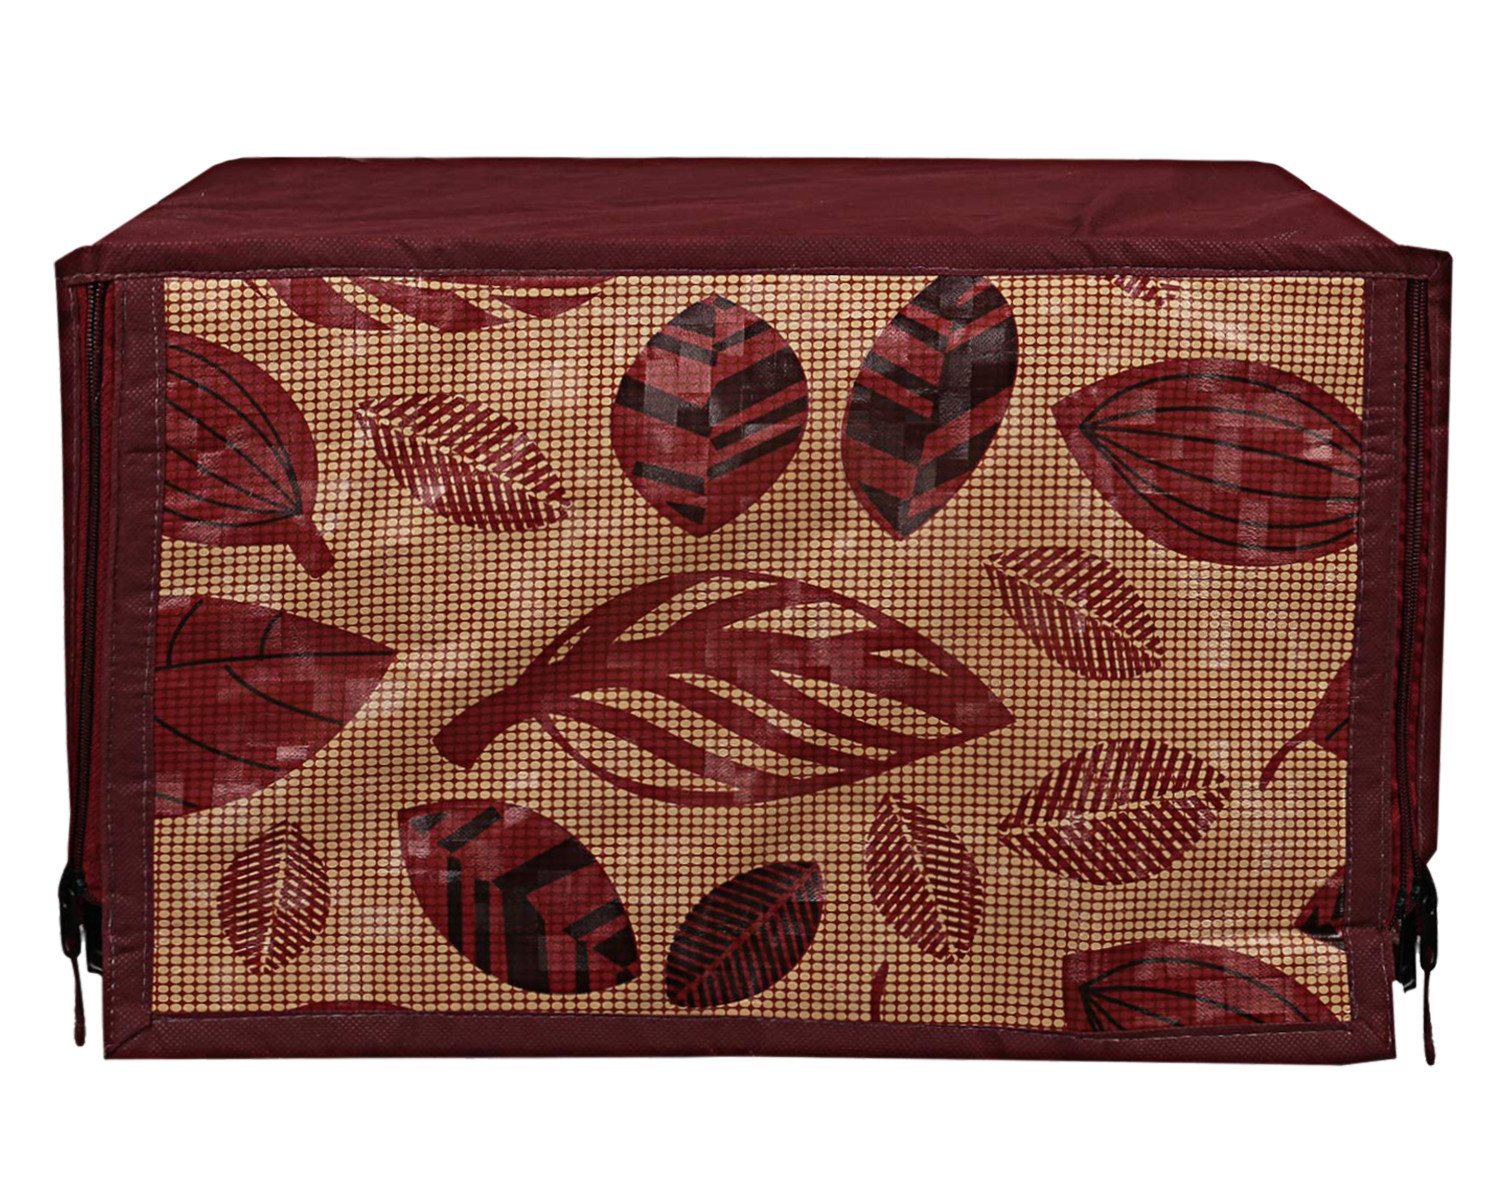 Kuber Industries PVC Leaf Printed Microwave Oven Cover,20 Ltr. (Brown)-HS43KUBMART25961